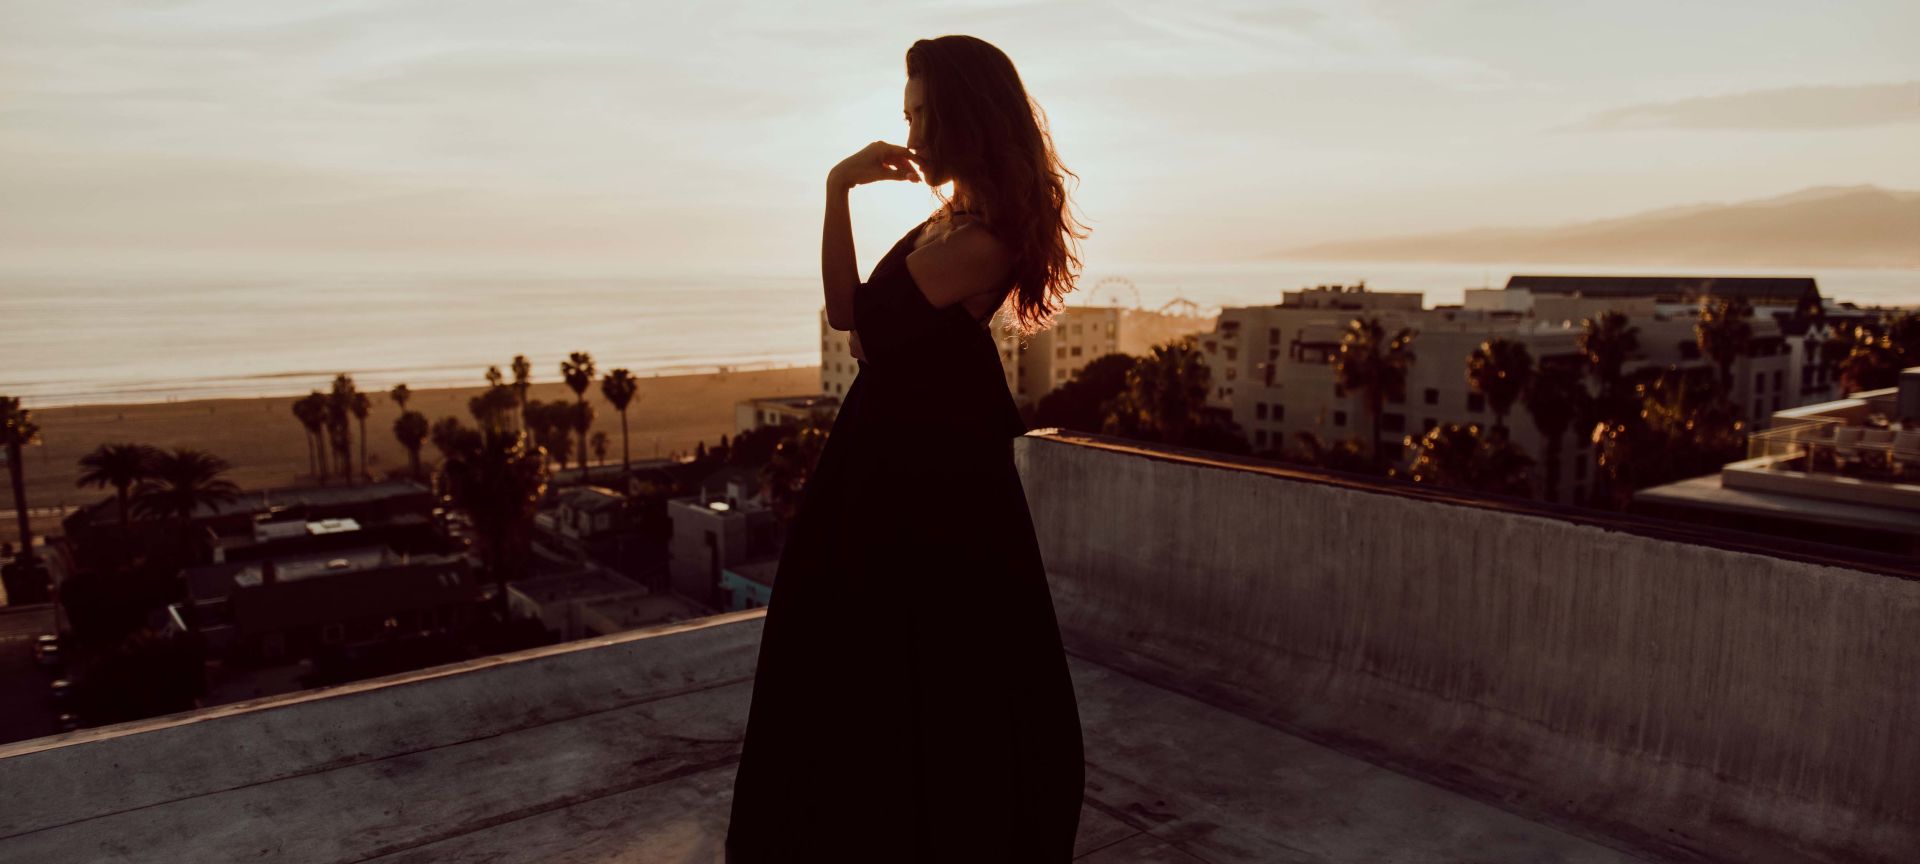 A Woman on the Roof of a Building Looking at the Sunset